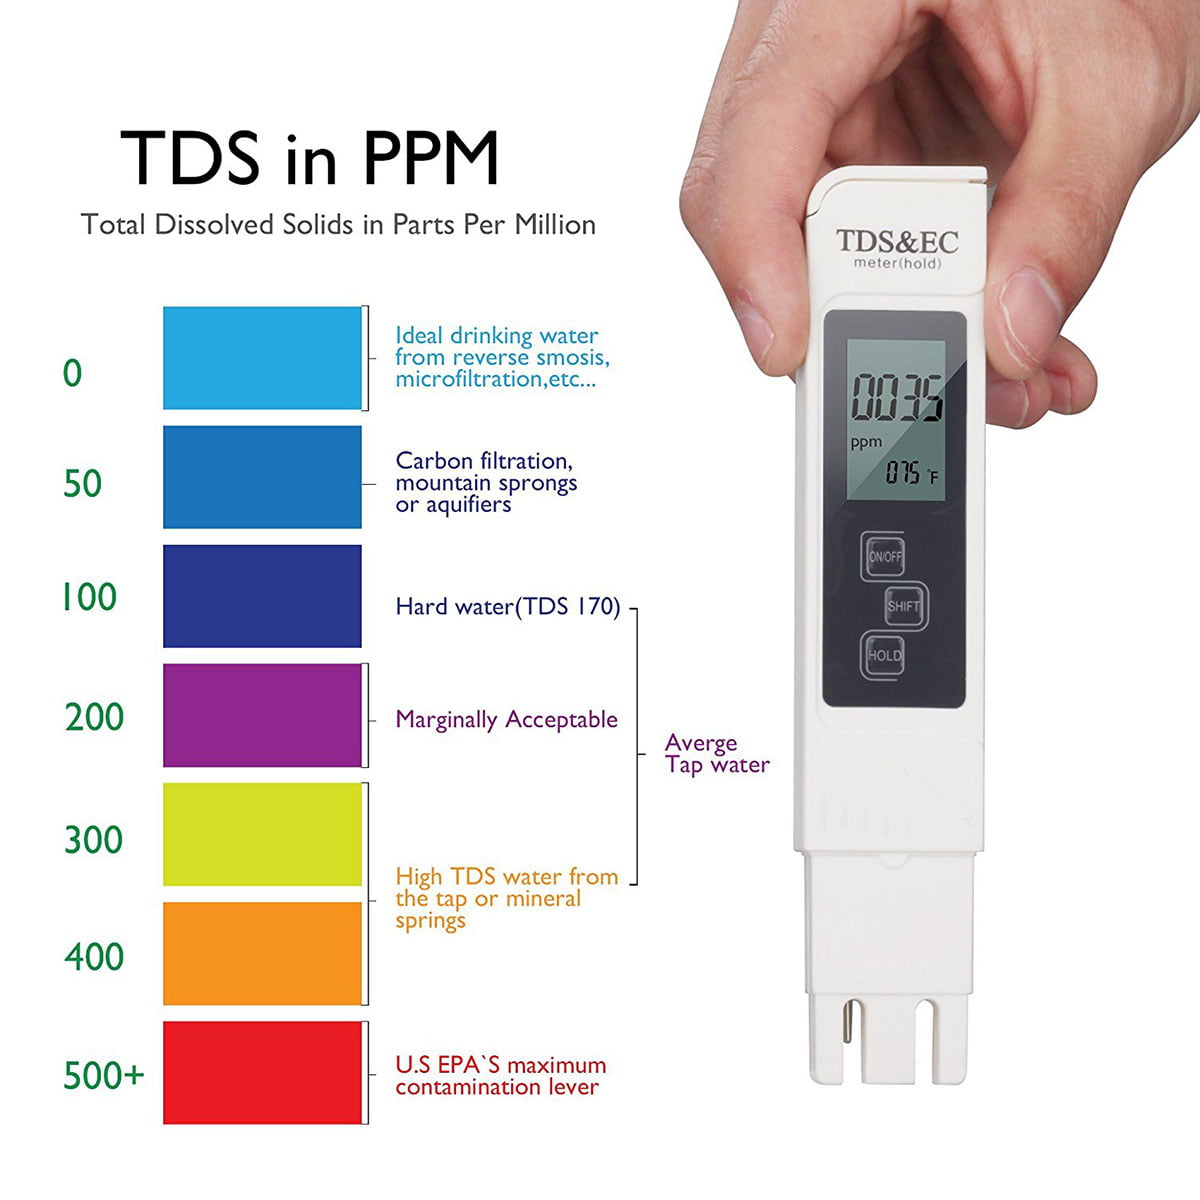 Details about   Digital TDS EC Meter Water Quality Tester with 0-9990 ppm Measurement Range 